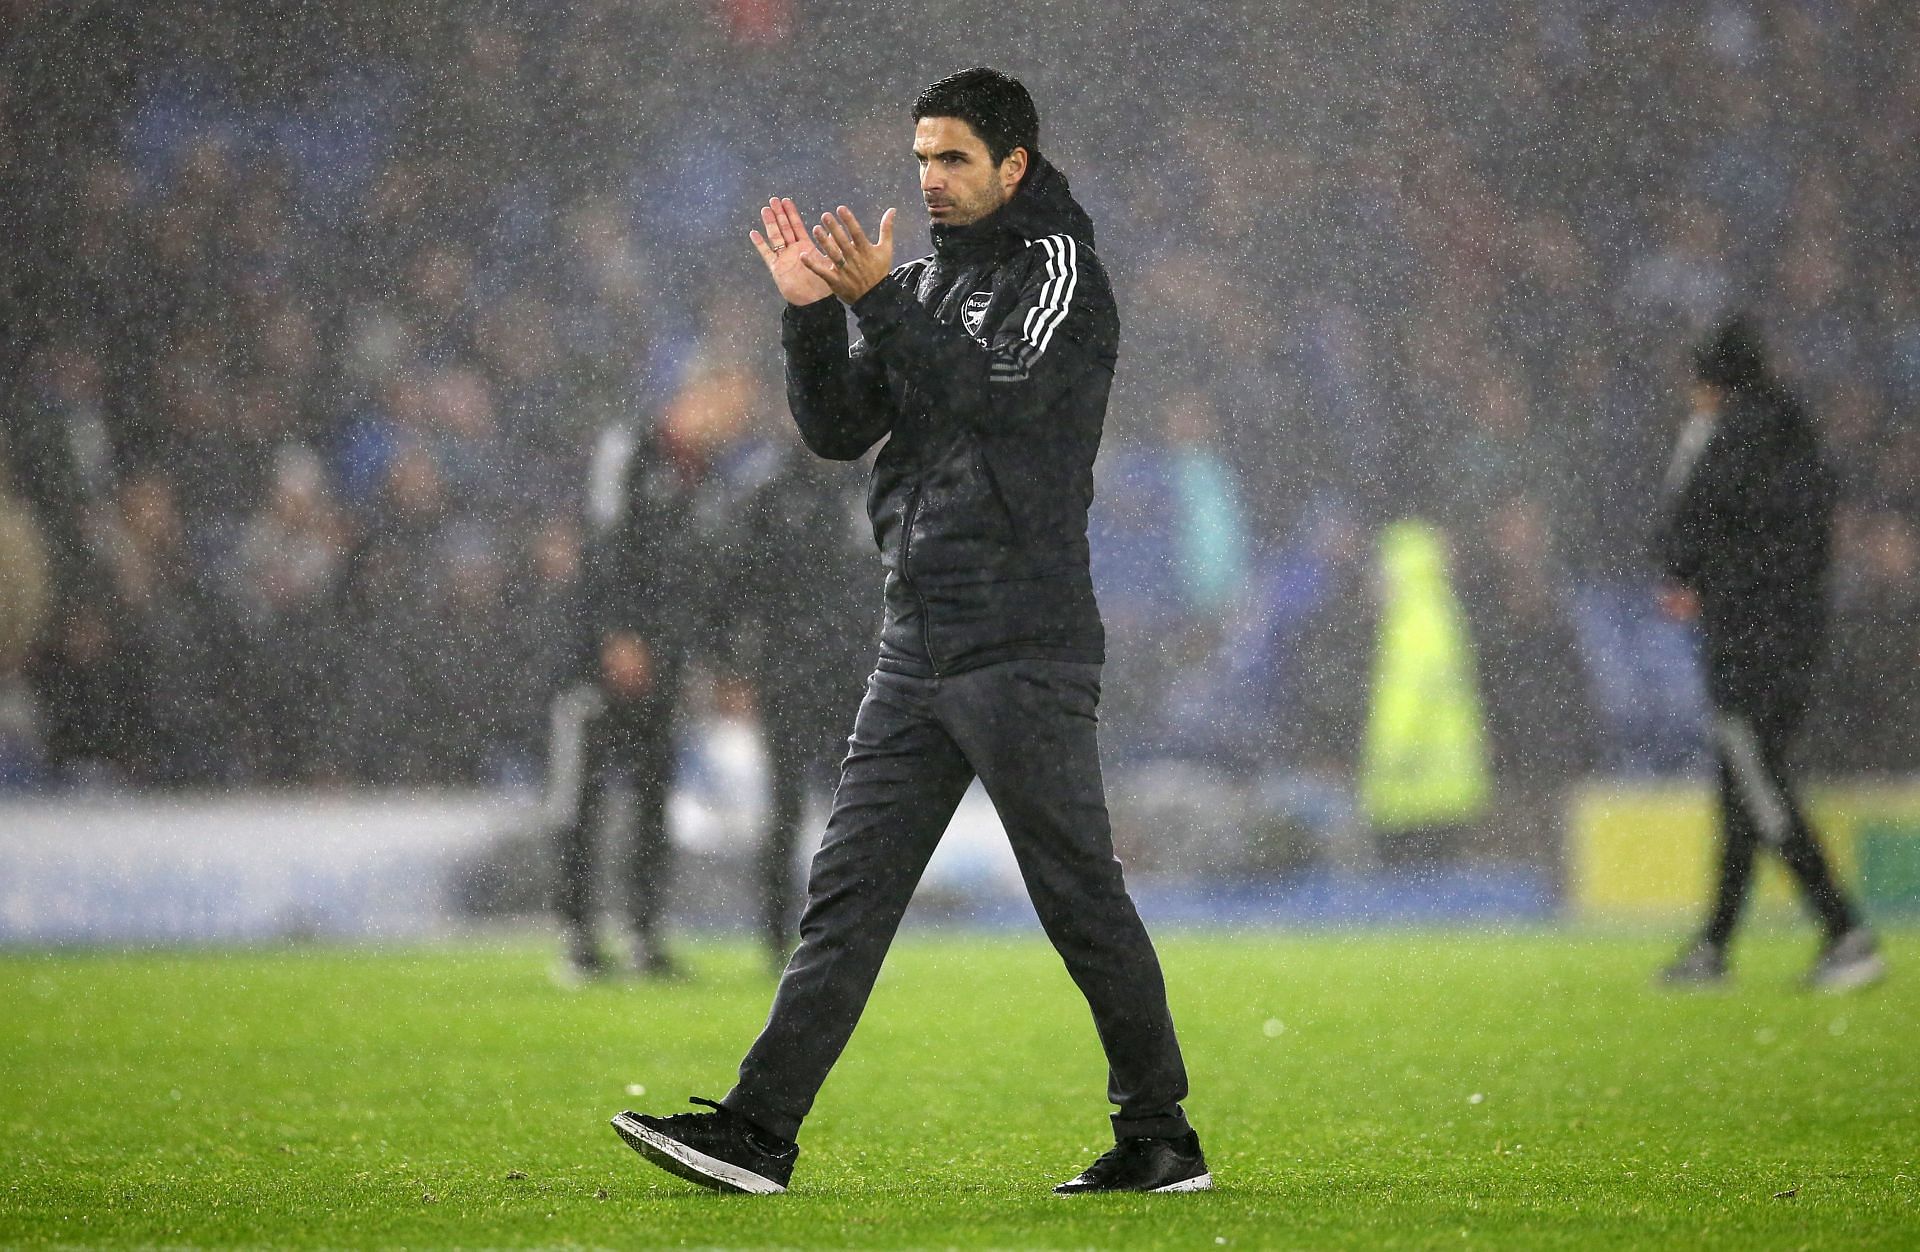 Arsenal manager Mikel Arteta guided his team to a 2-0 win over Leeds United.